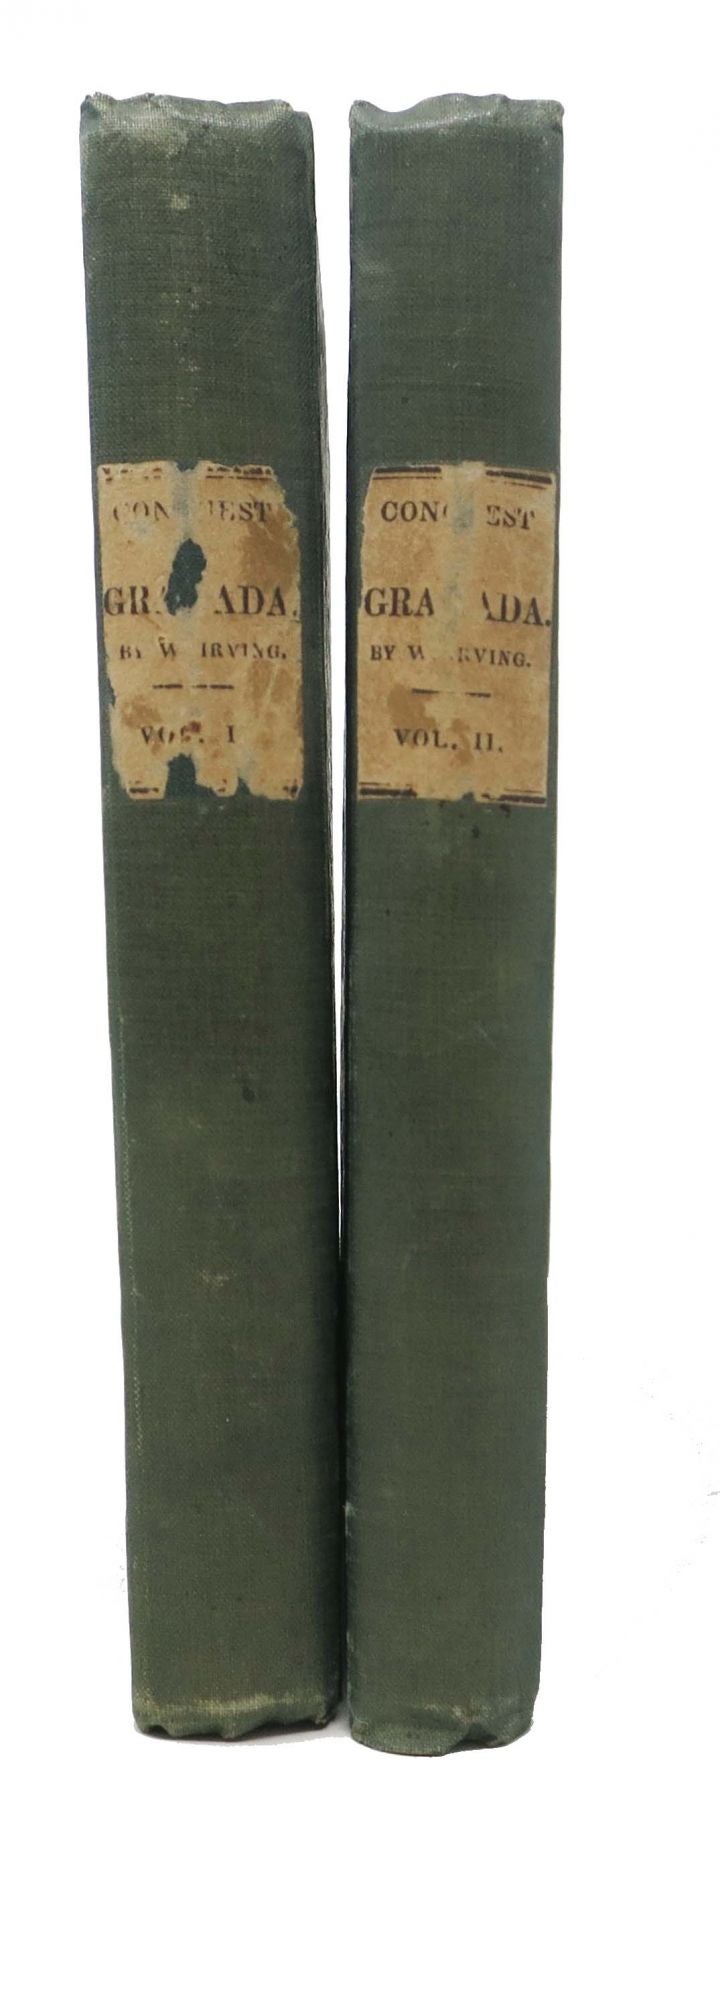 Agapida, Fray Antonio [pseudonym of Irving, Washington. 1783 - 1859] - A CHRONICLE Of The CONQUEST Of GRANADA. In Two Volumes